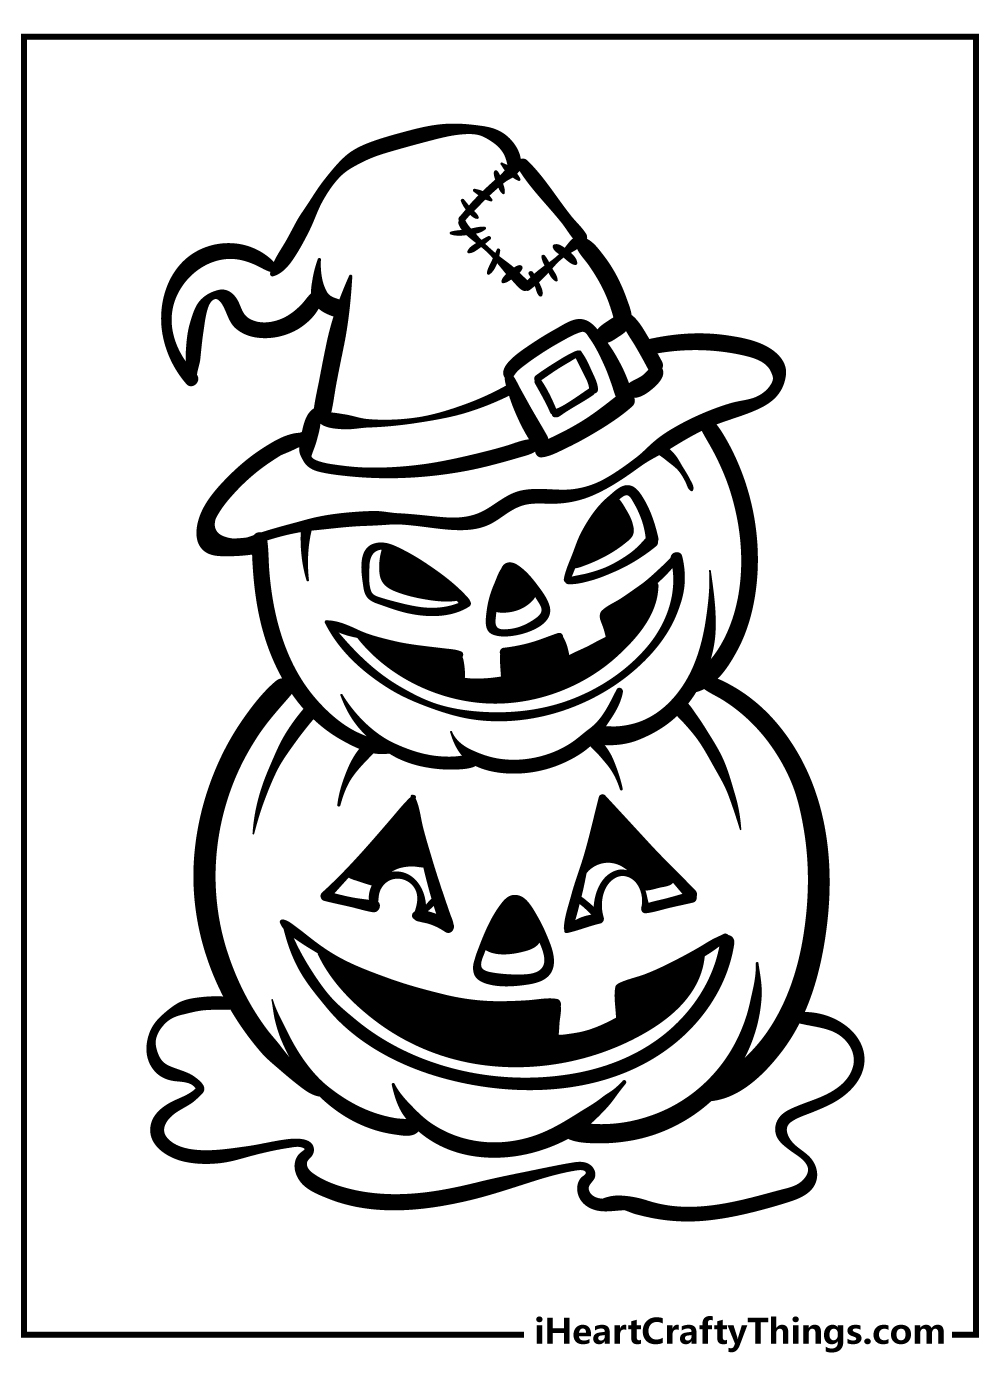 Halloween Coloring Pages free pdf download